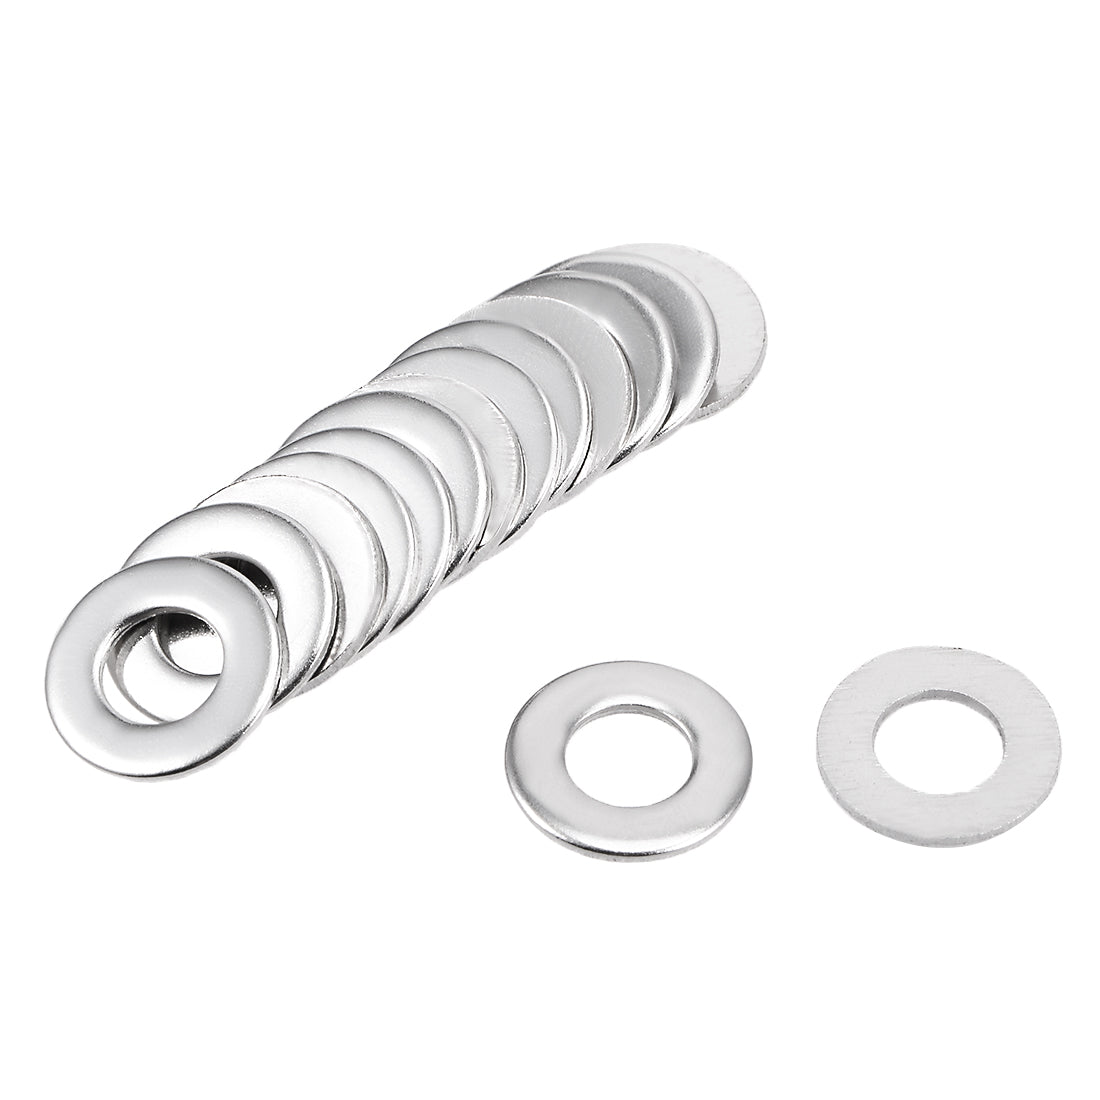 uxcell Uxcell 100Pcs 6mm x 12mm x 0.8mm 304 Stainless Steel Flat Washer for Screw Bolt